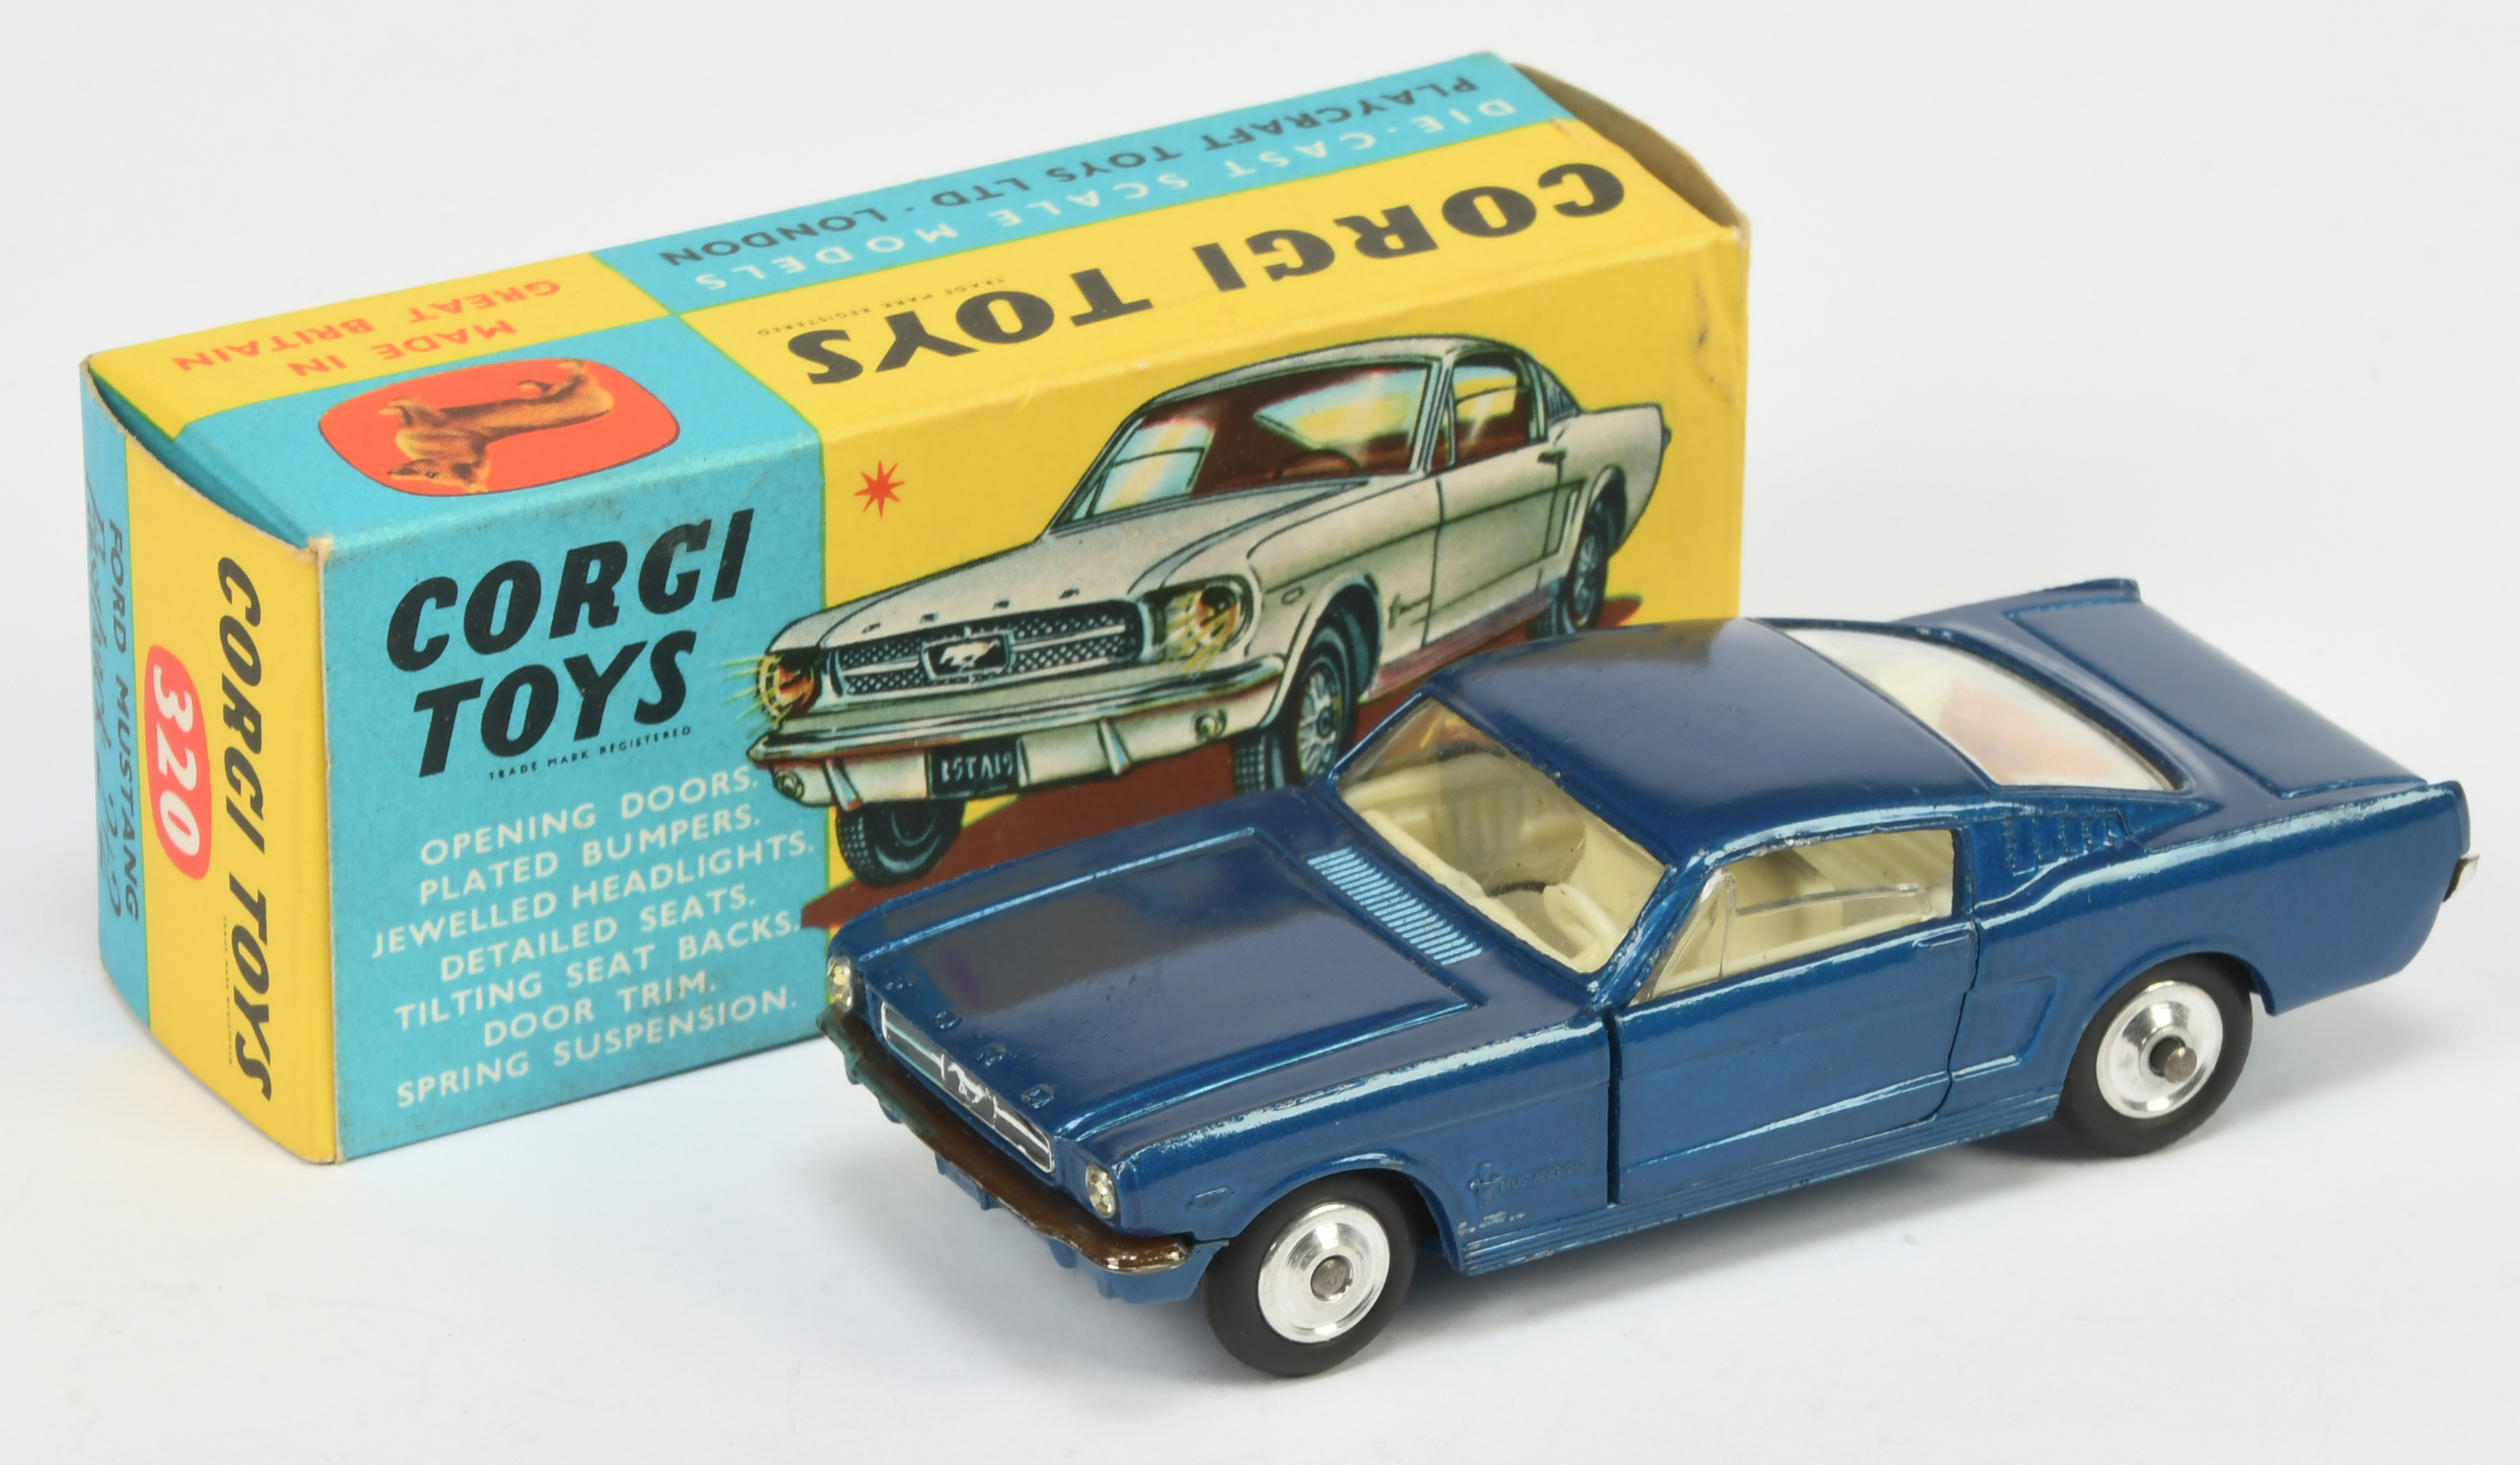 Corgi Toys 320 Ford Mustang Fastback  - Blue body, ivory interior with dog figure, chrome trim an...